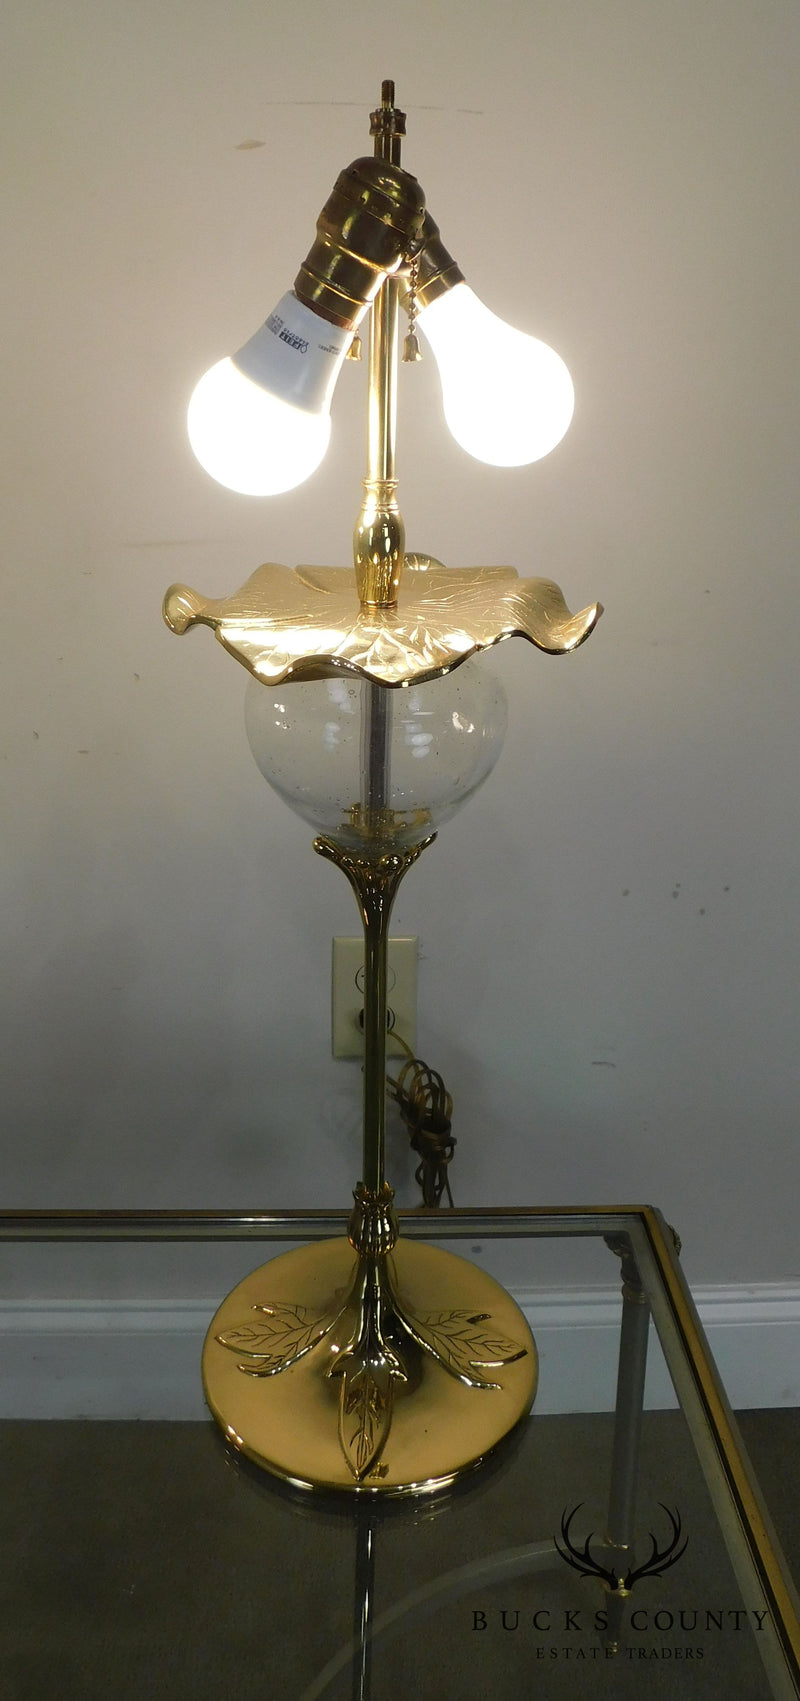 Vintage Pair of Quoizel Brass and Glass Foliate Table Lamps W/Shades